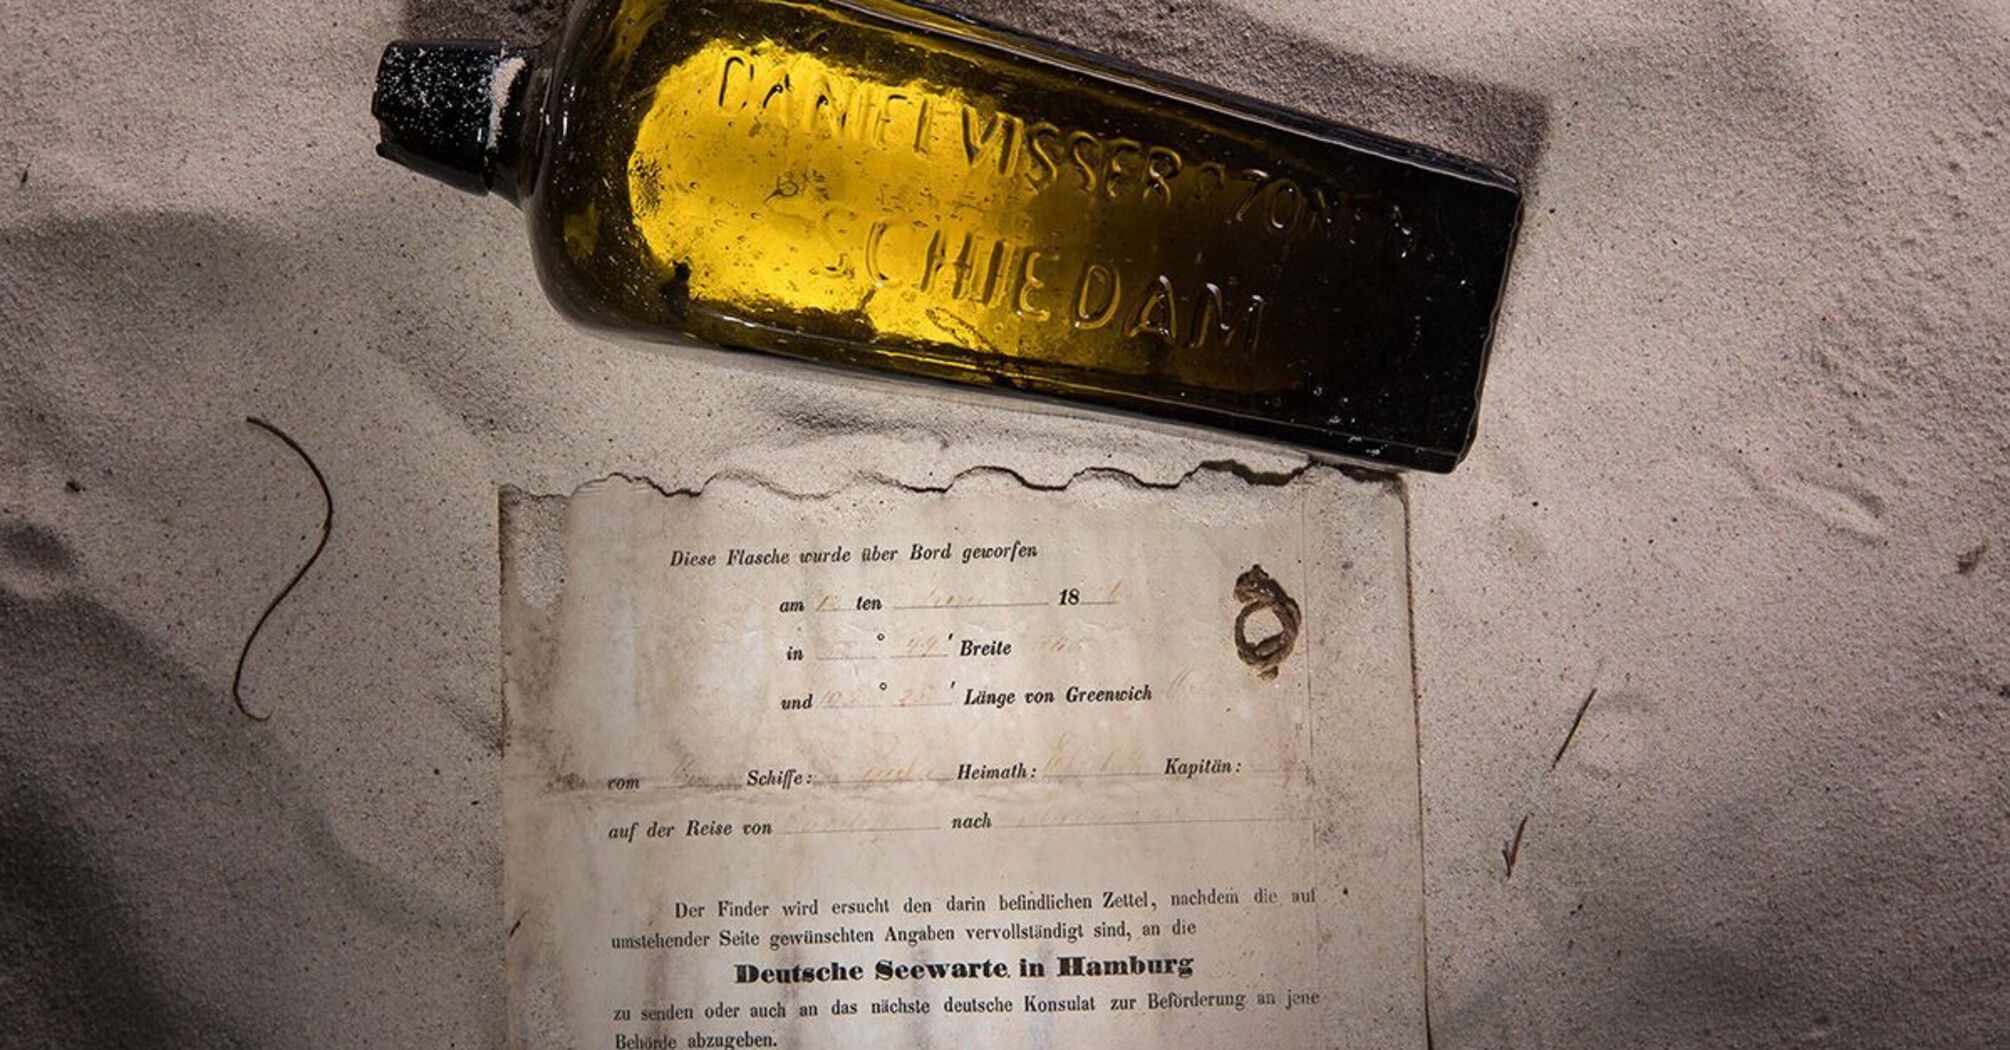 The oldest message in a bottle found